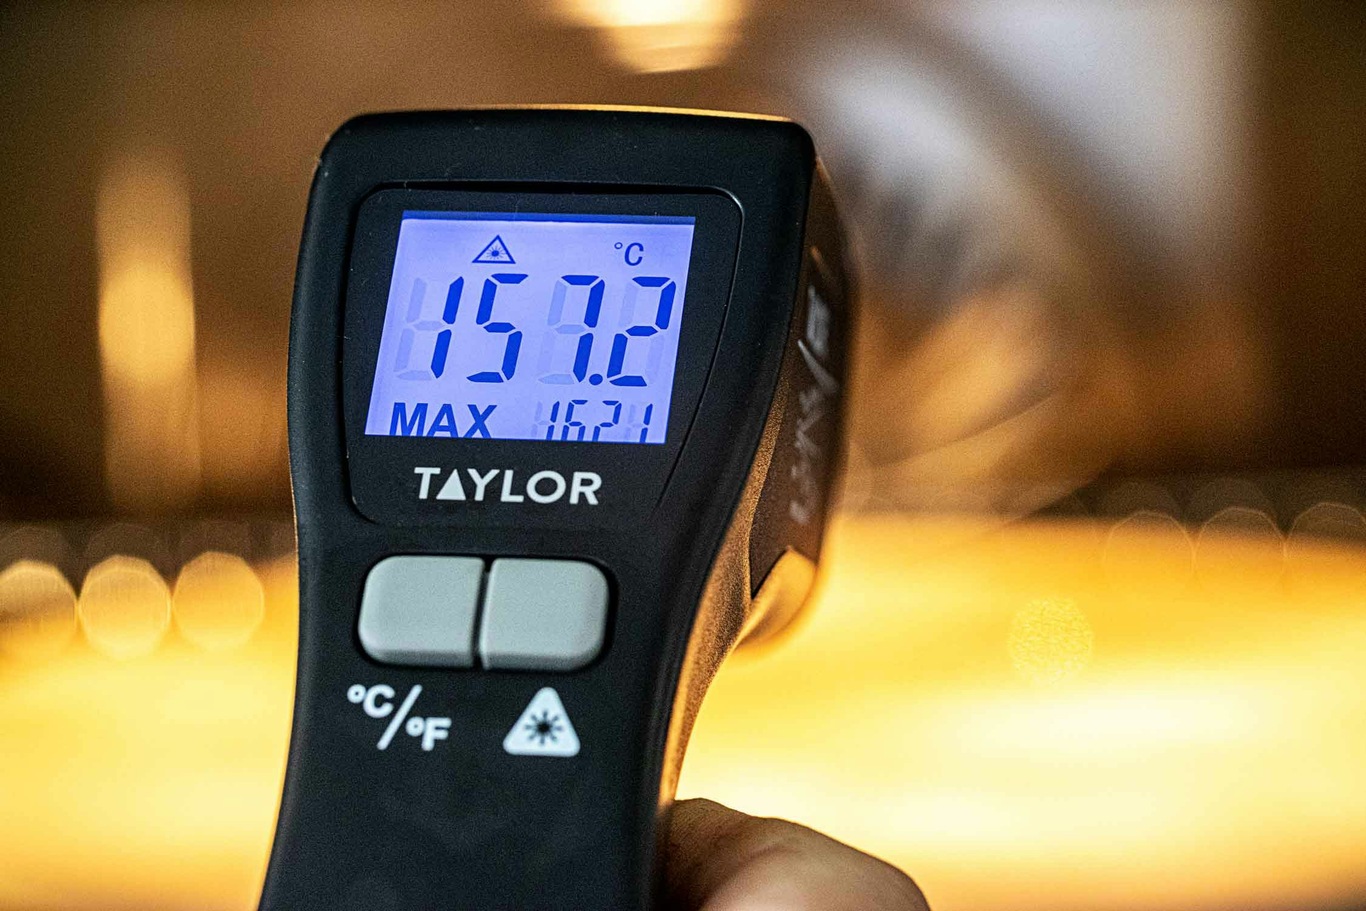 https://royaldesign.com/image/2/kitchen-craft-taylor-pro-infrared-thermometer-blister-packed-3?w=800&quality=80